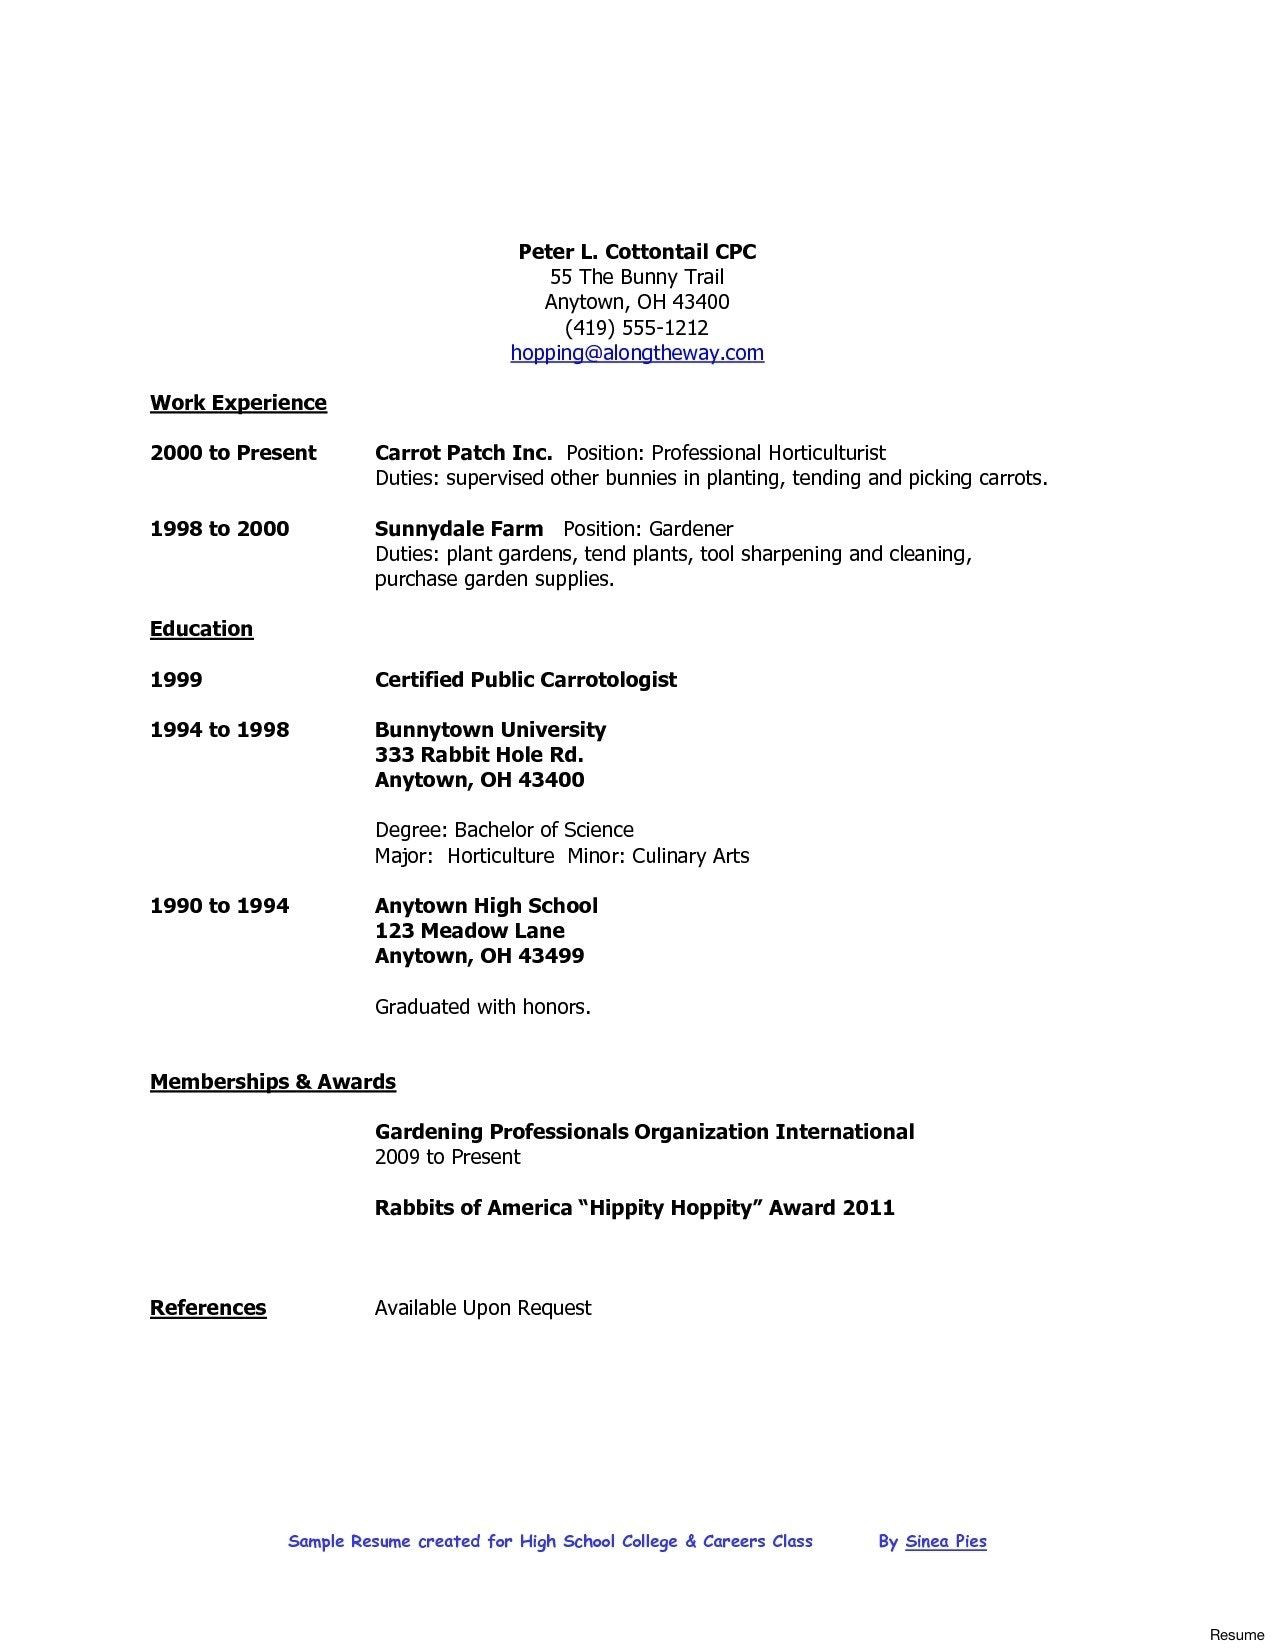 Sample Resume without High School Diploma Resume format High School Graduate , #format #graduate #resume …